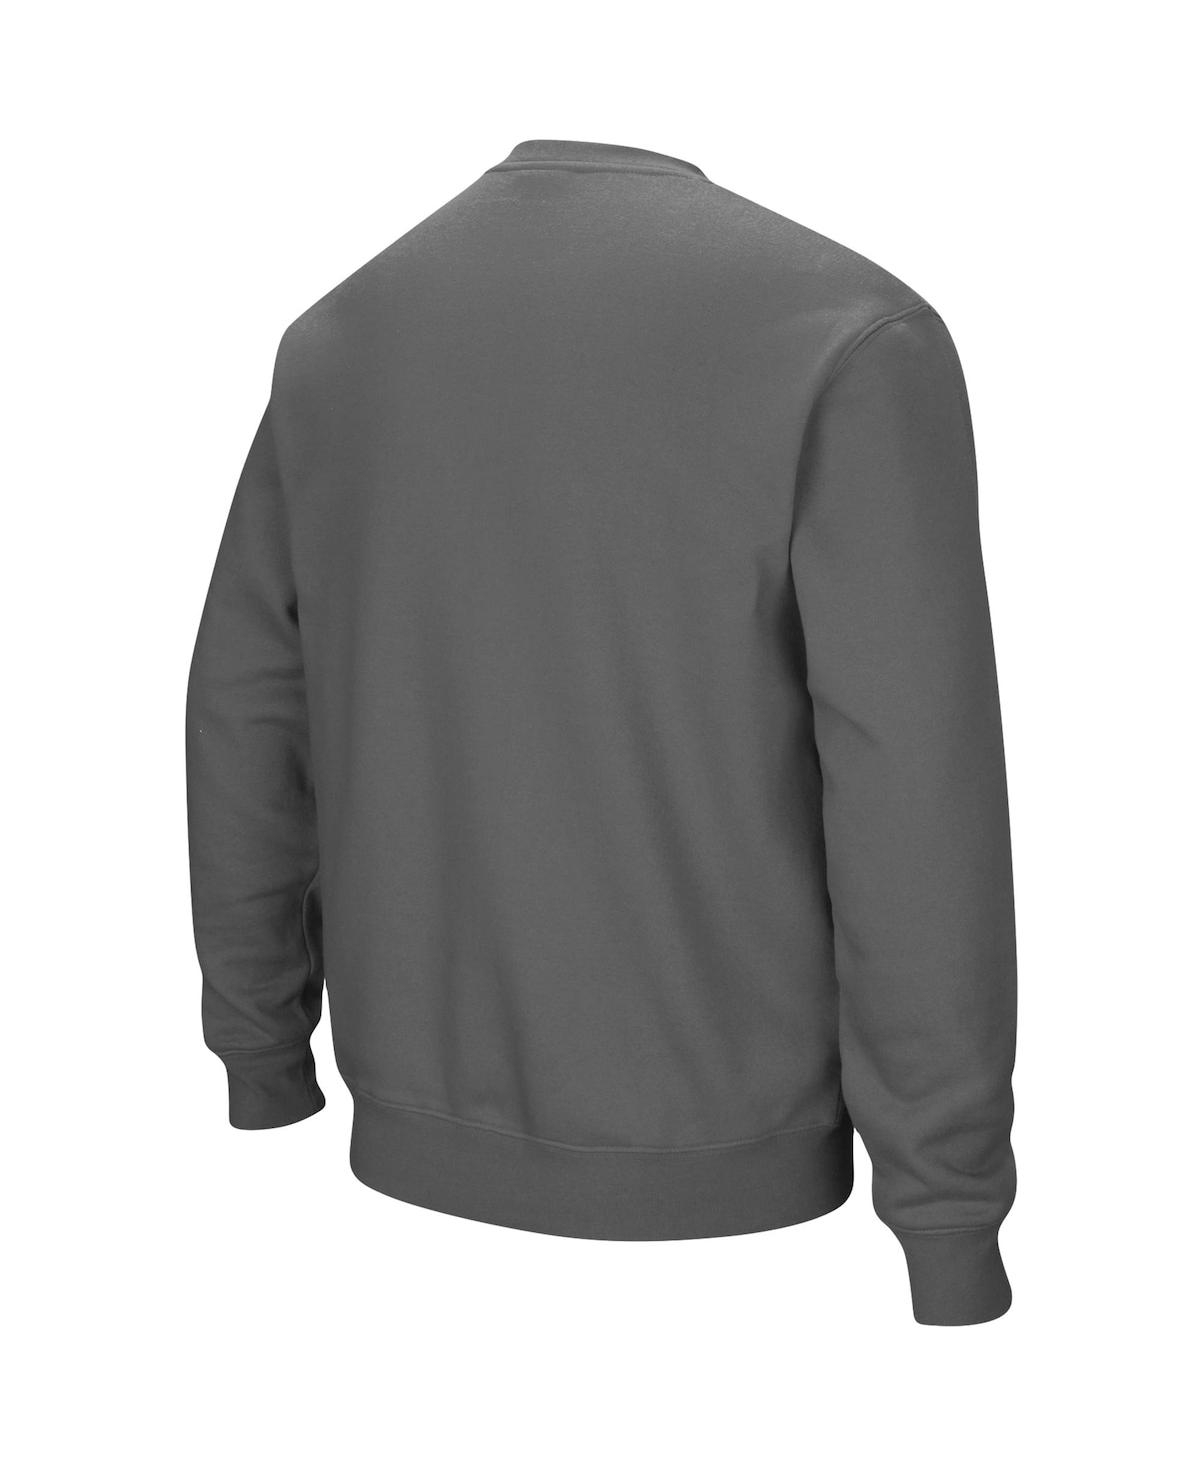 Shop Colosseum Men's  Charcoal Colorado State Rams Arch & Logo Tackle Twill Pullover Sweatshirt